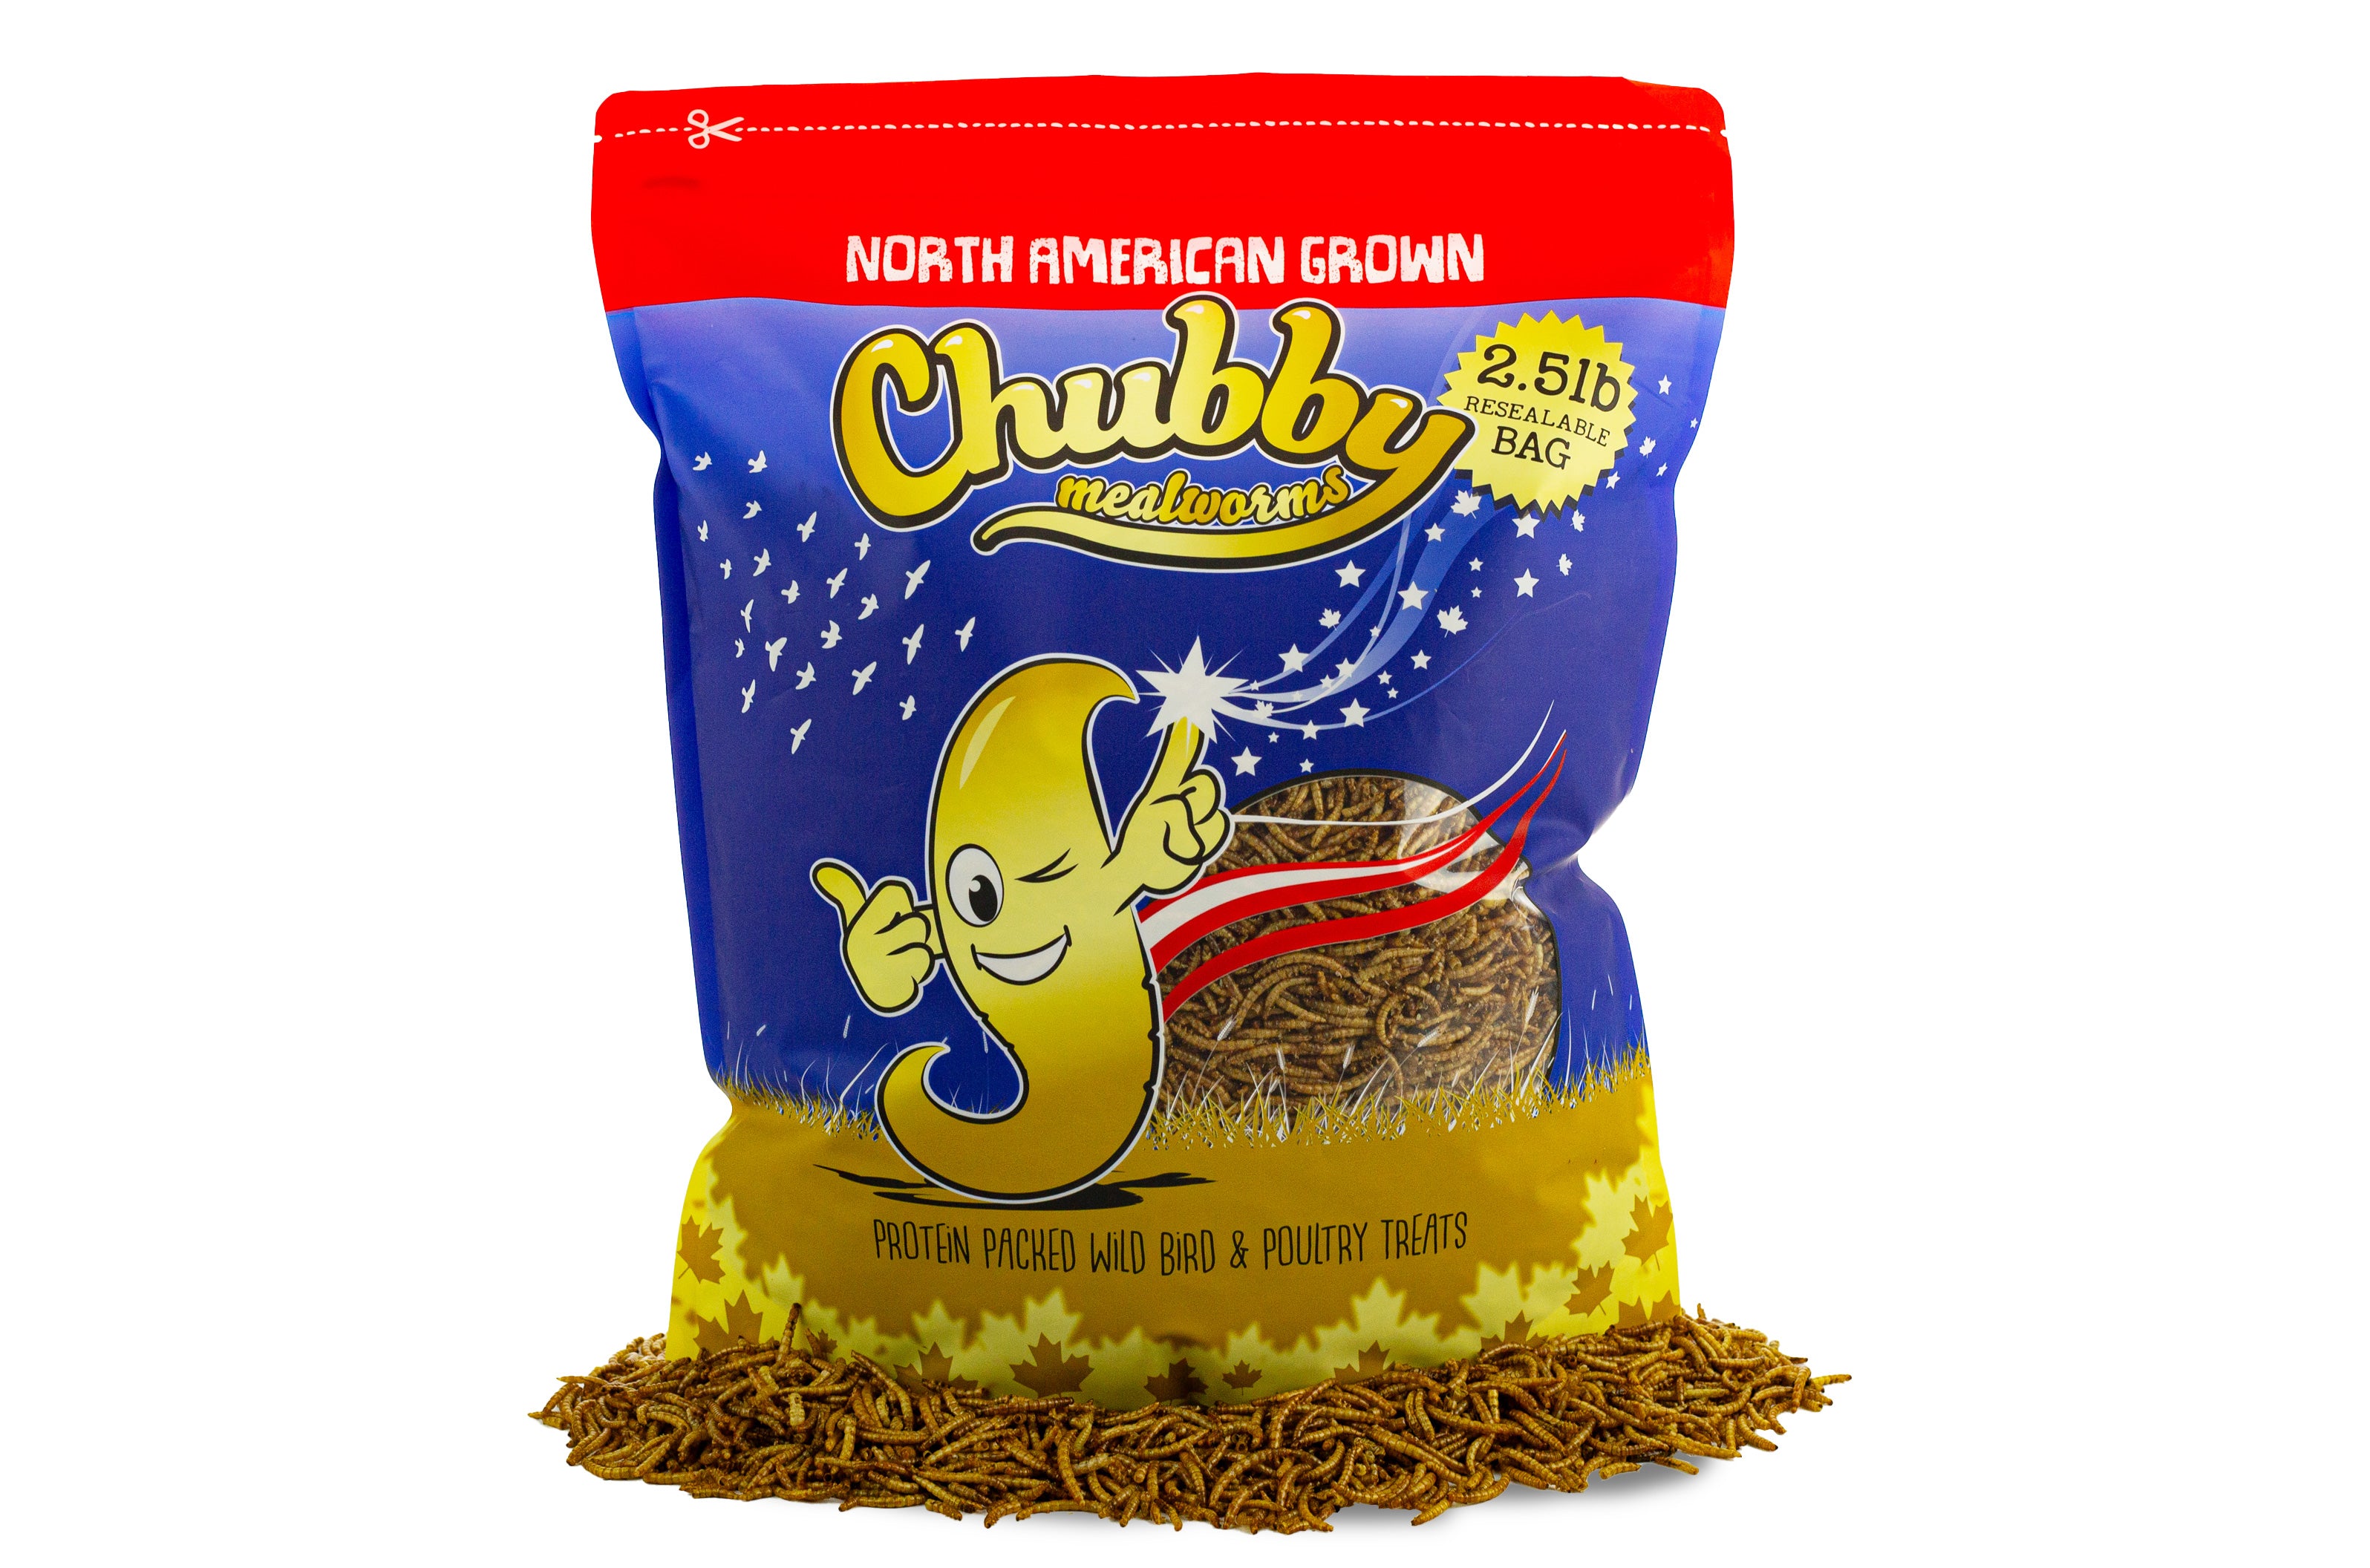 2.5Lbs Chubby NA Grown Dried Mealworms (Non-GMO) - Currently supplied in a plain bag